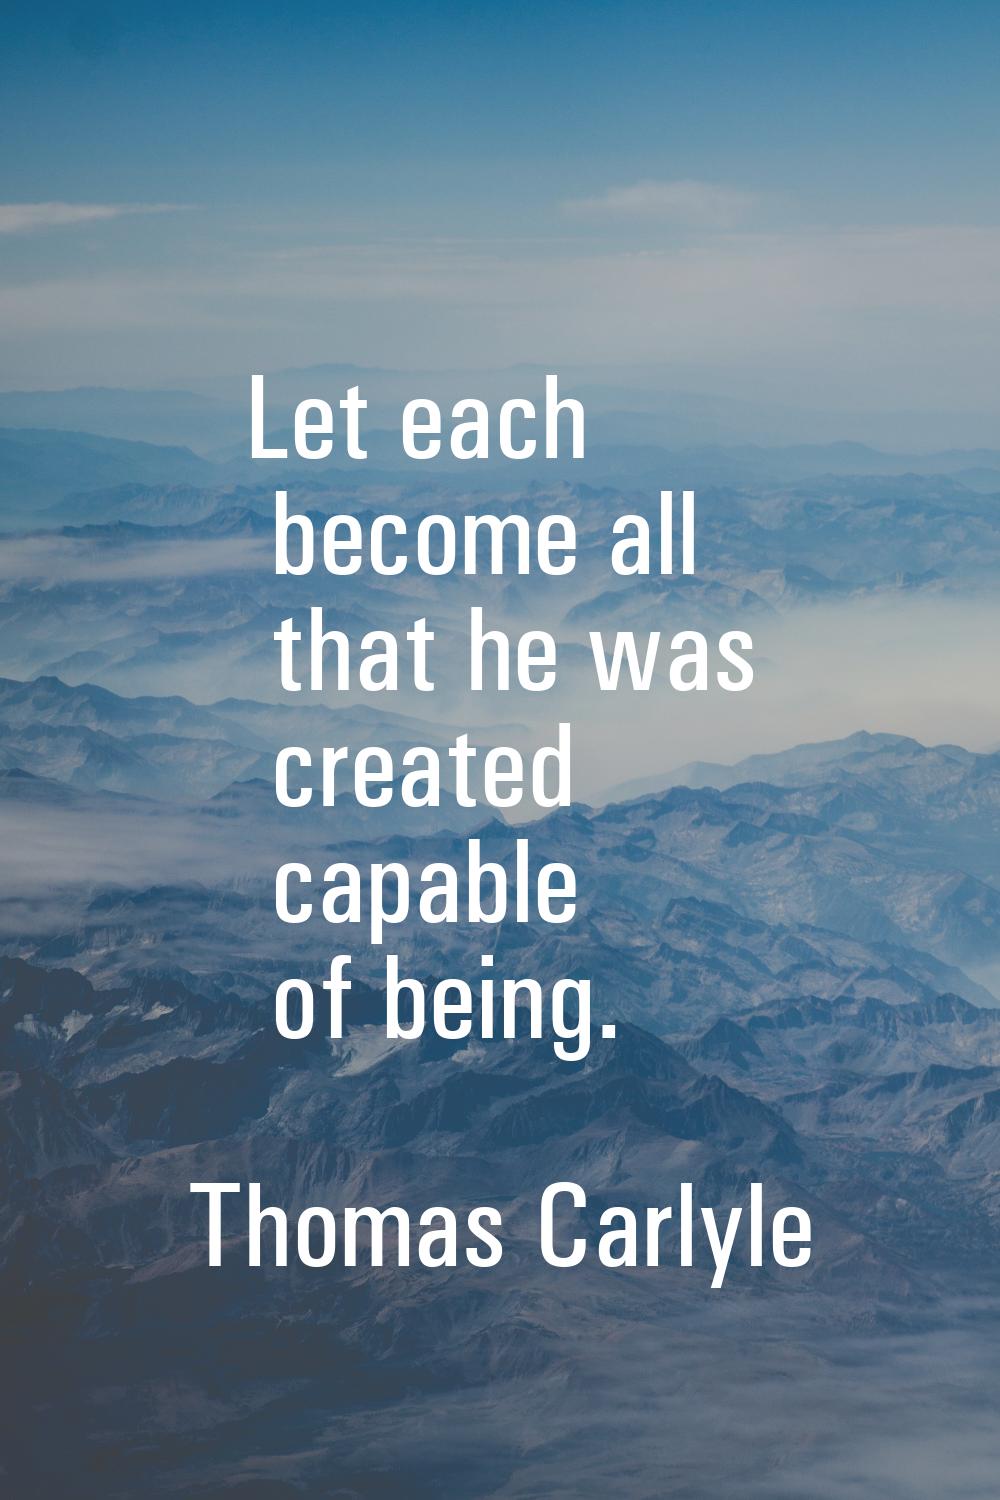 Let each become all that he was created capable of being.